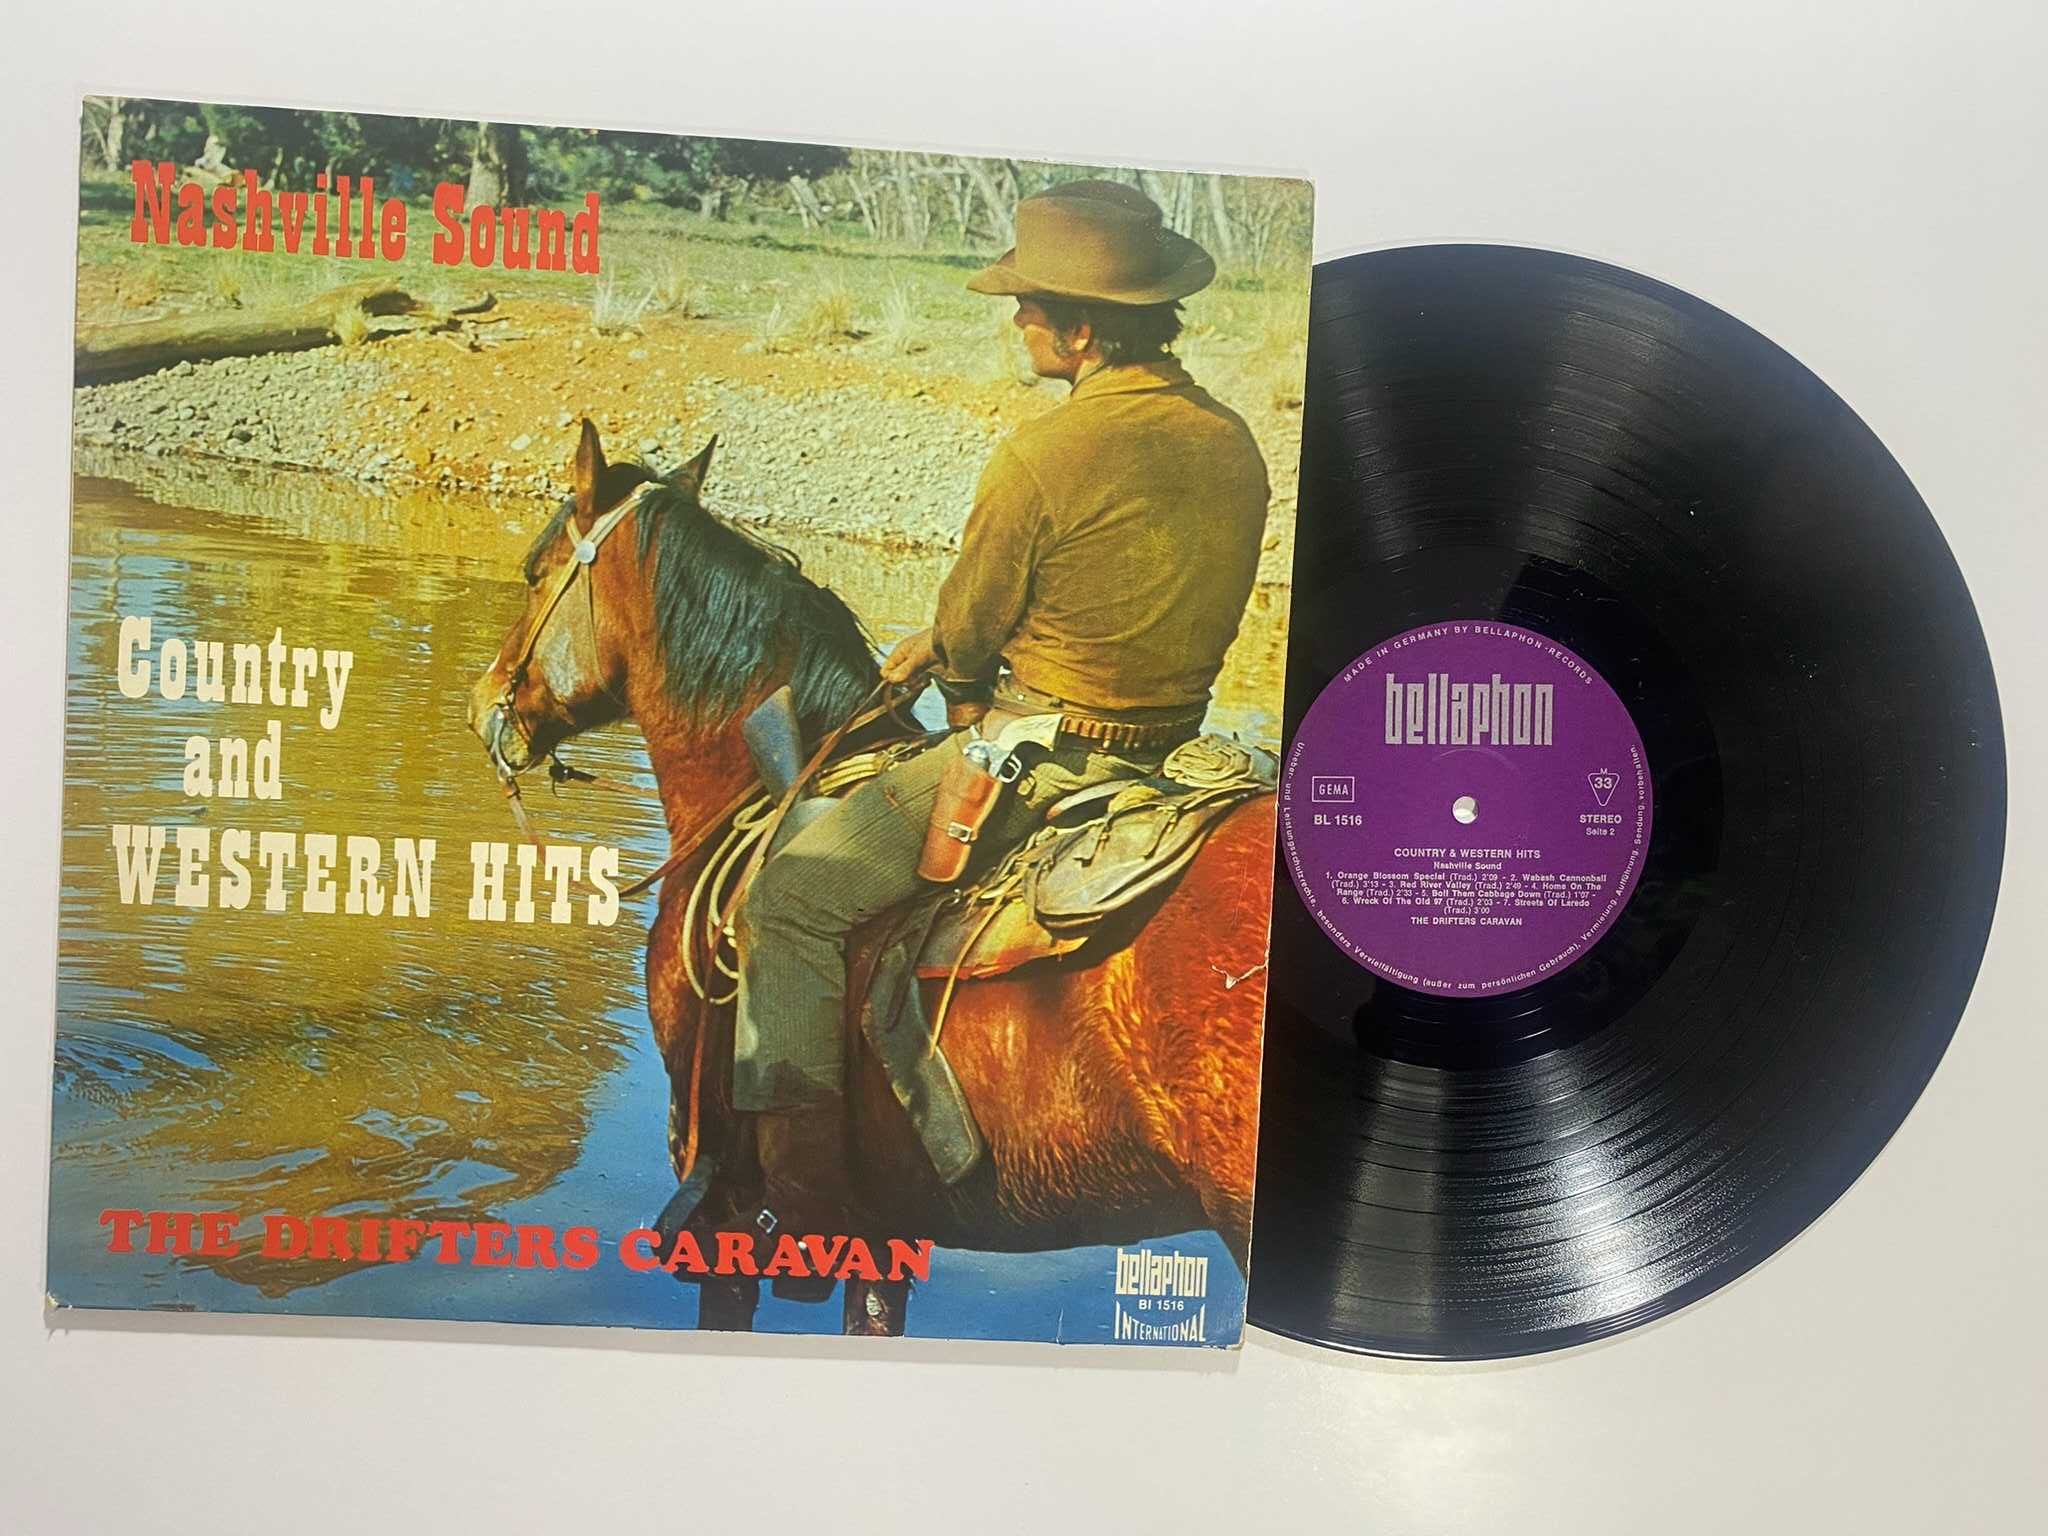 The Drifters Caravan – Country And Western Hits LP Winyl (A-174)